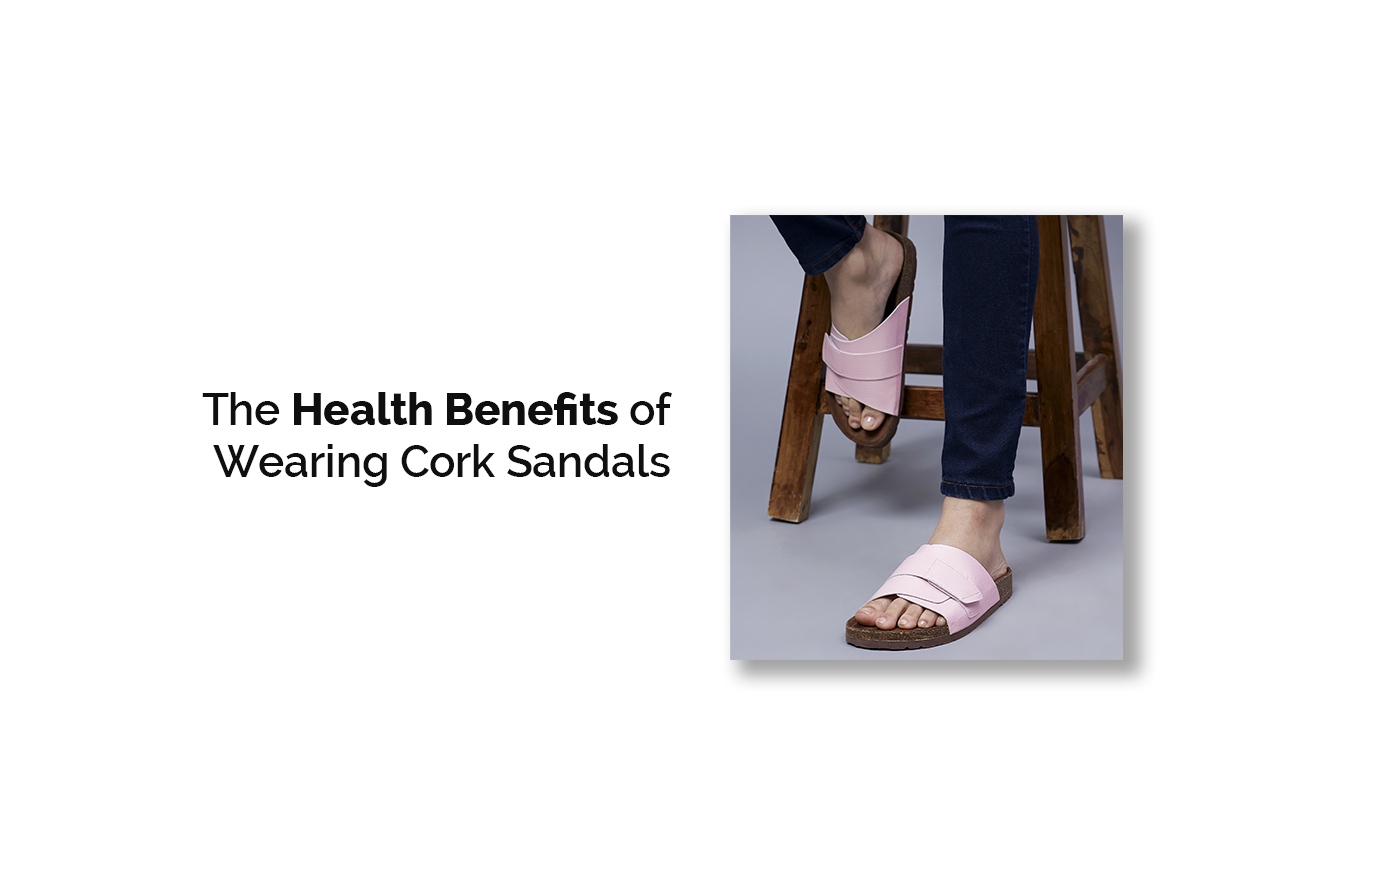 The Health Benefits of Wearing Cork Sandals: Comfort and Foot Support